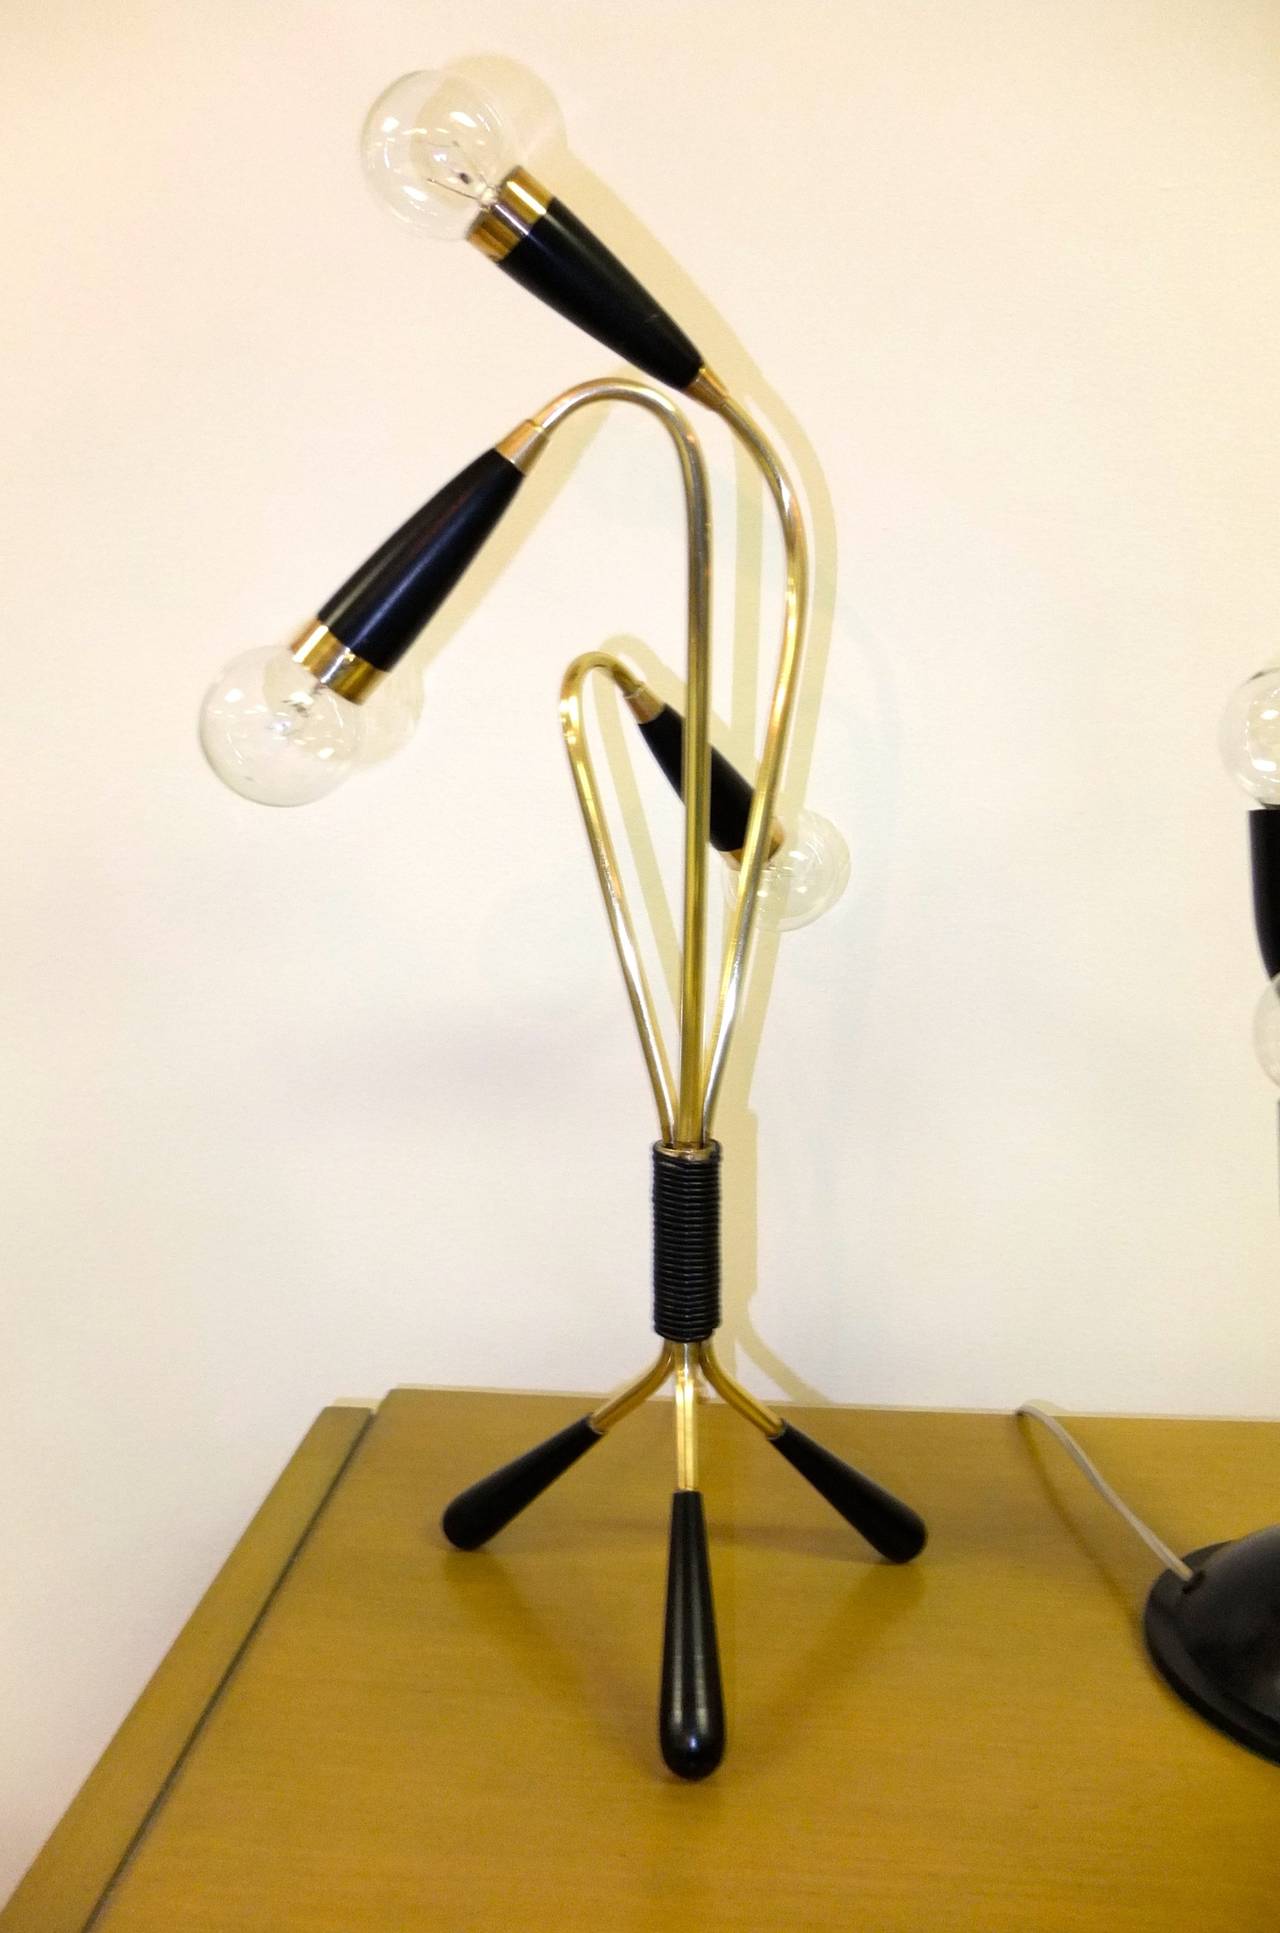 Another of my most favorite lamps, this guy has 'Jazz Hands' and 